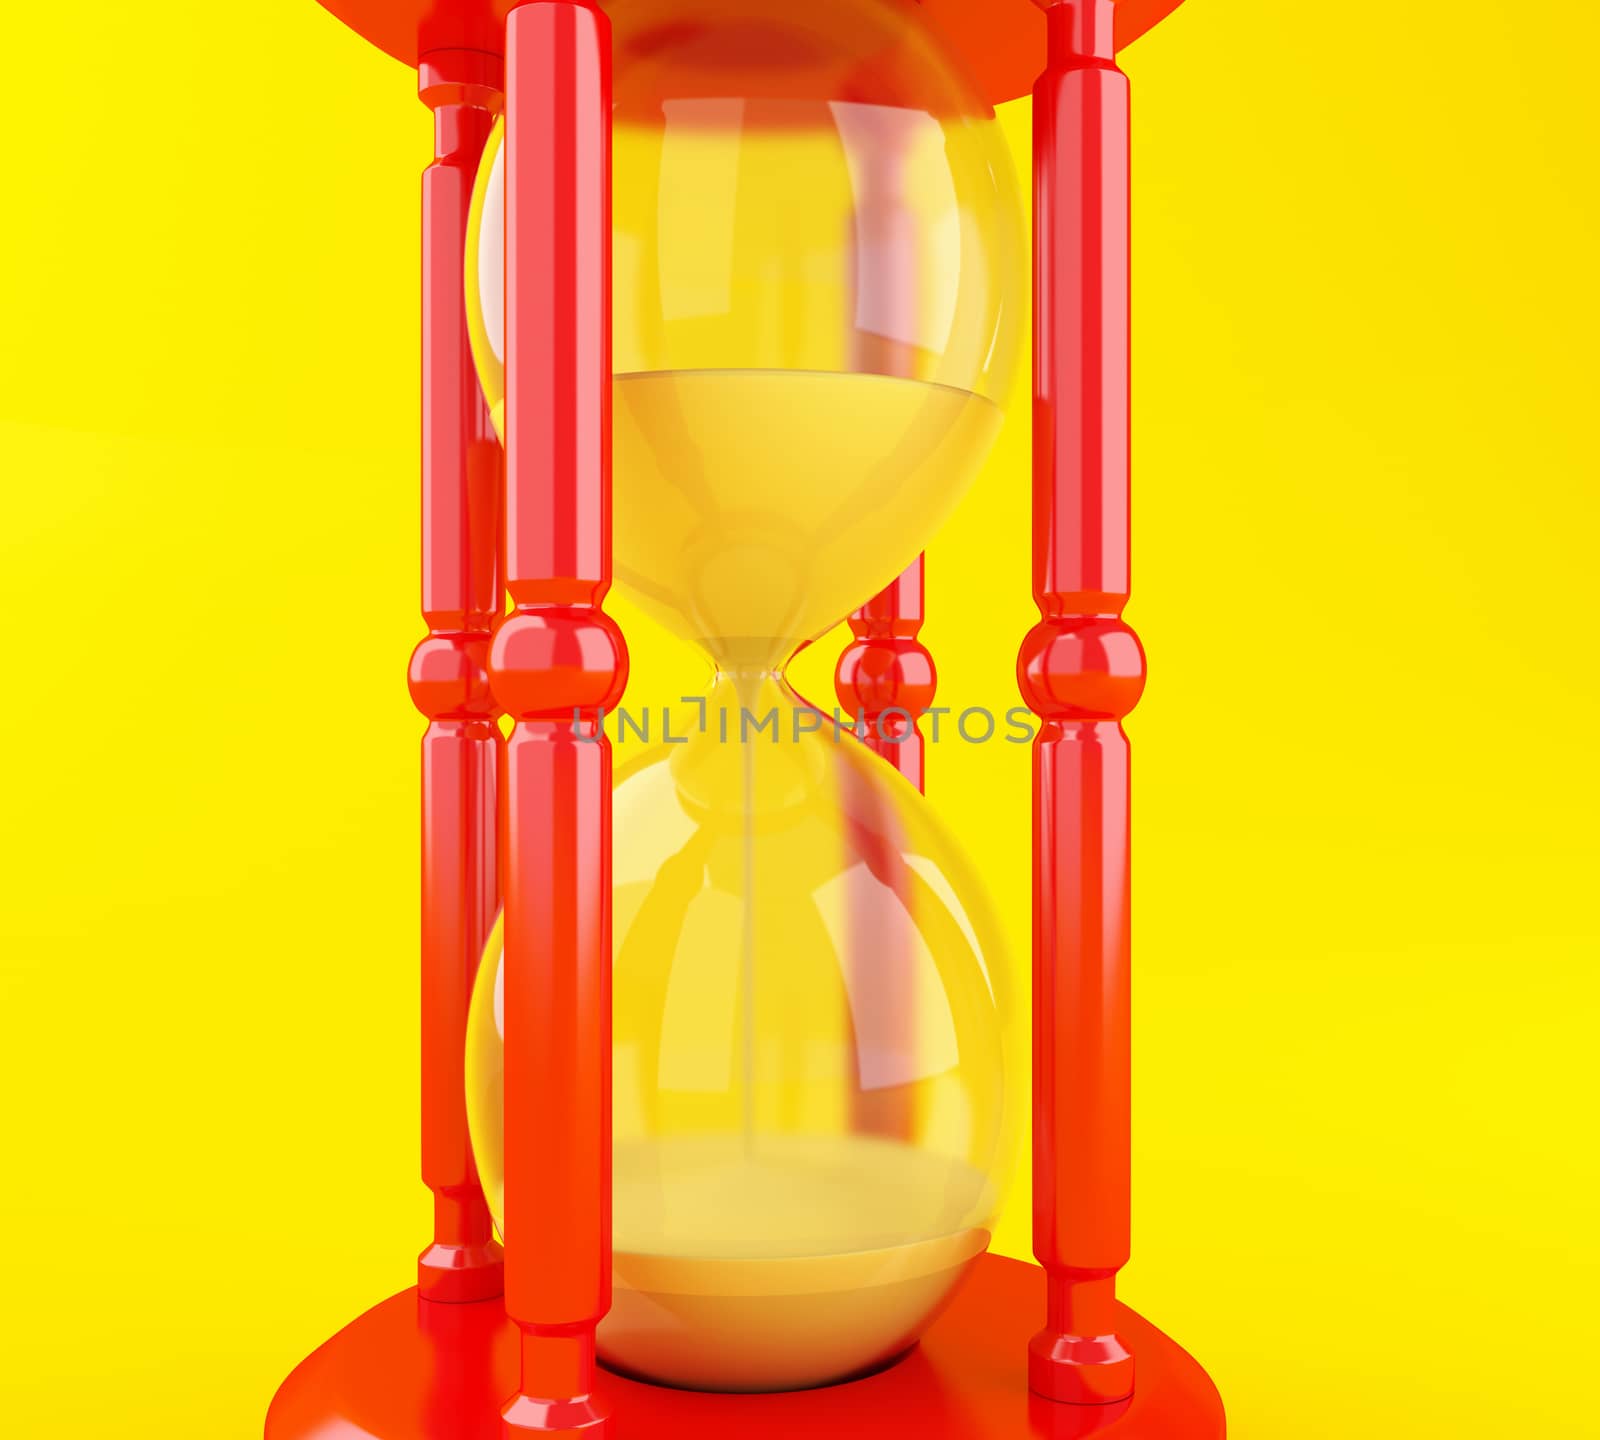 3d illustration. Hourglass, sand clock on yellow background. Time concept.